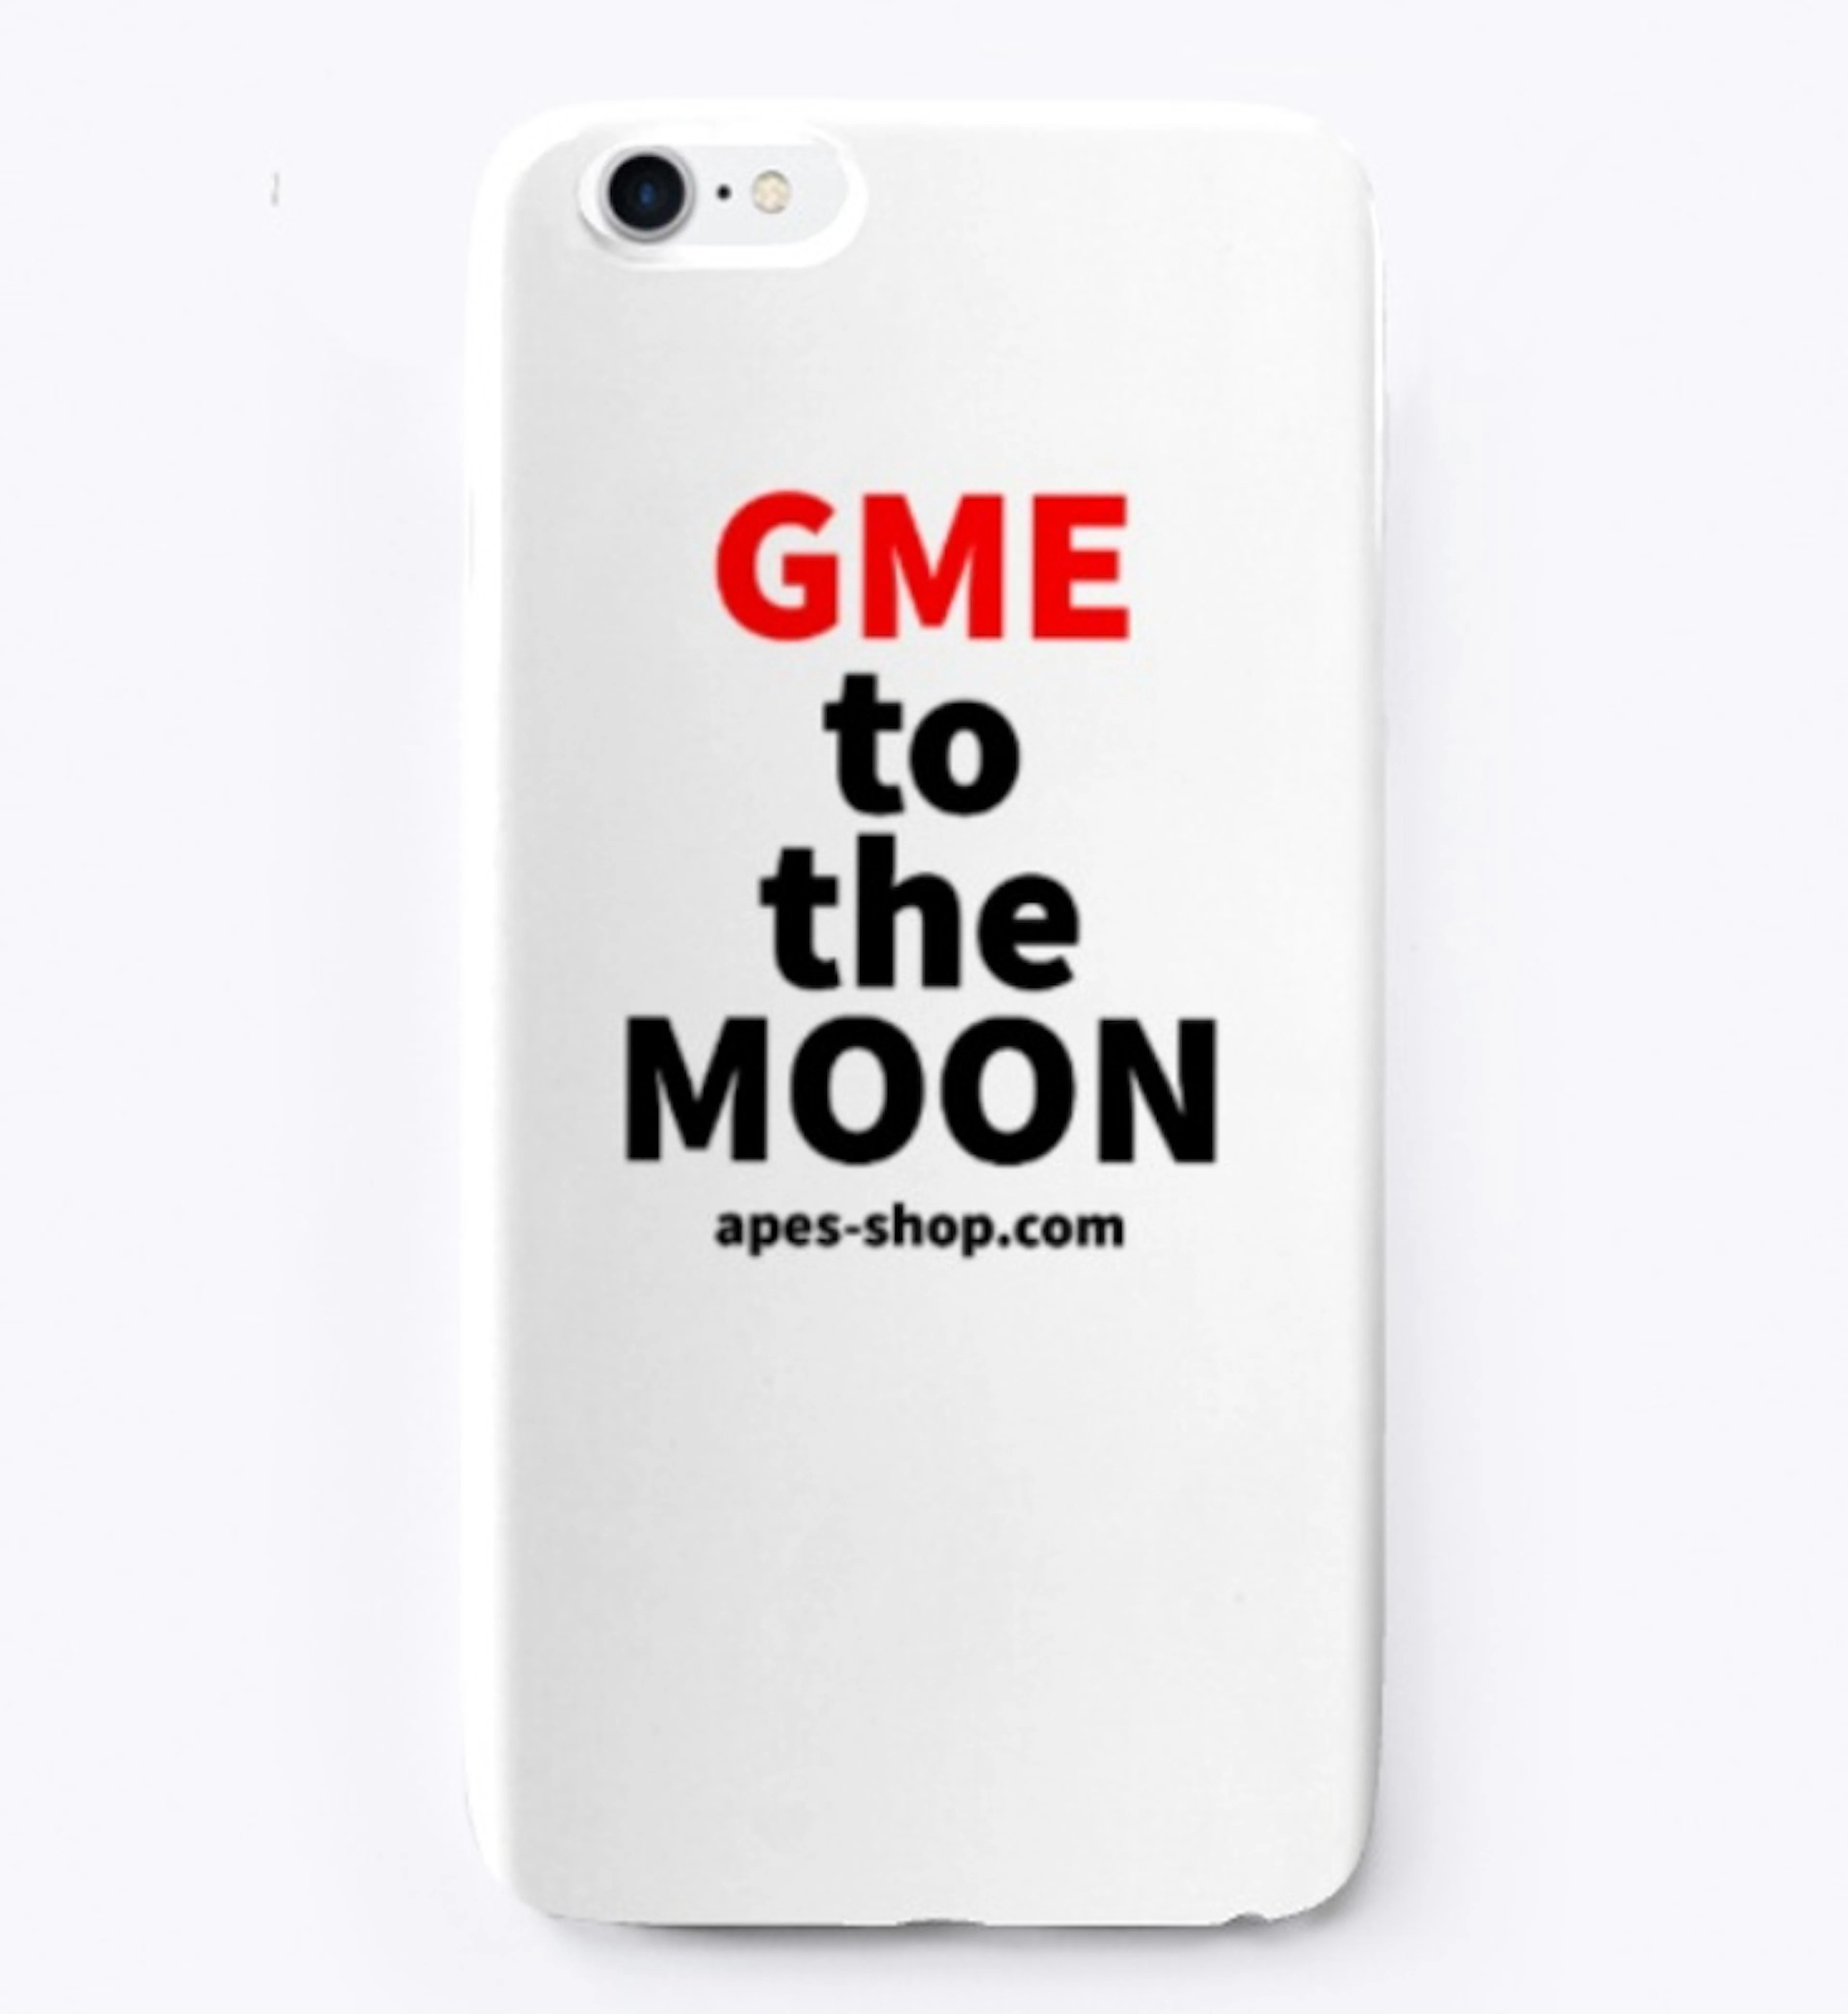 GME to the MOON phone case